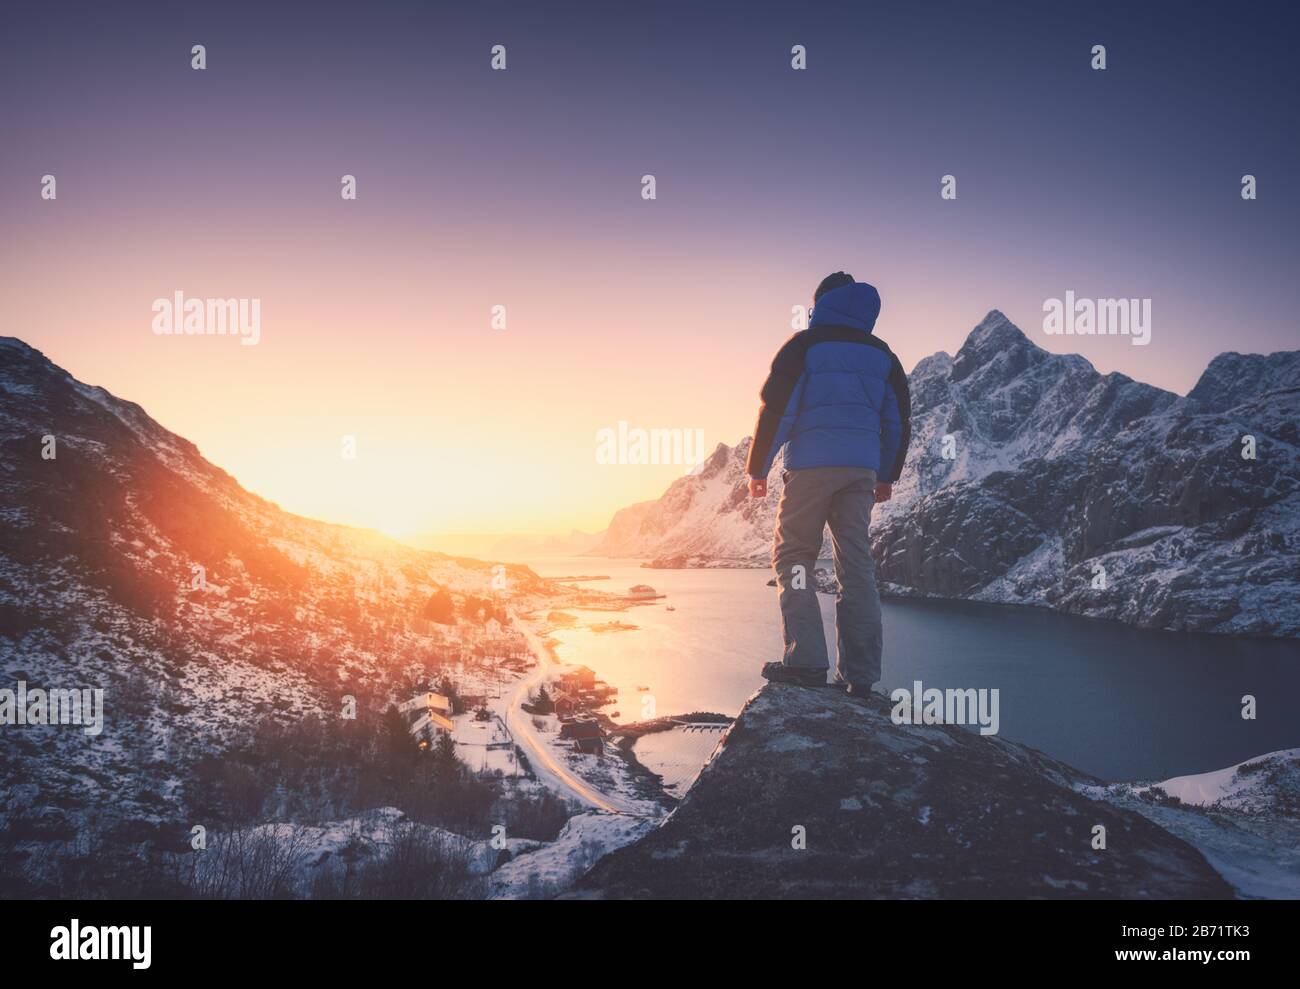 Man is standing on the mountain peak against snowy fjord Stock Photo